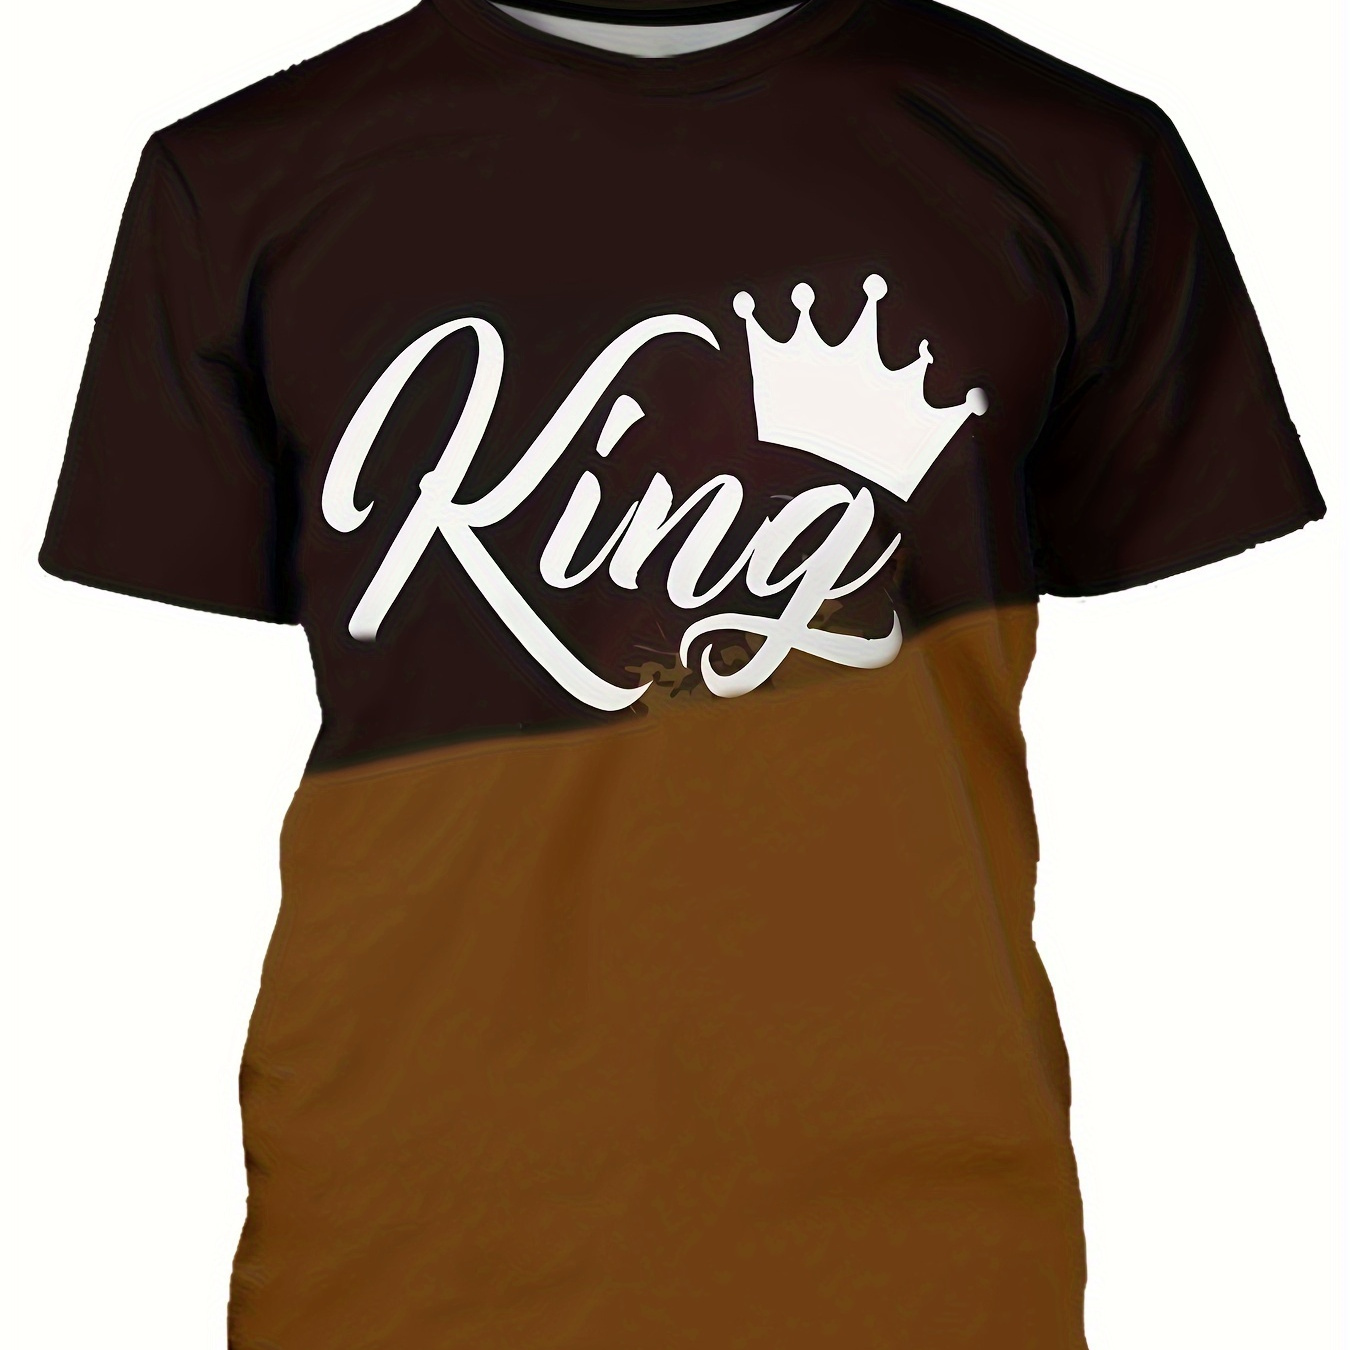 

Men's King Print T-shirt, Casual Short Sleeve Crew Neck Tee, Men's Clothing For Outdoor